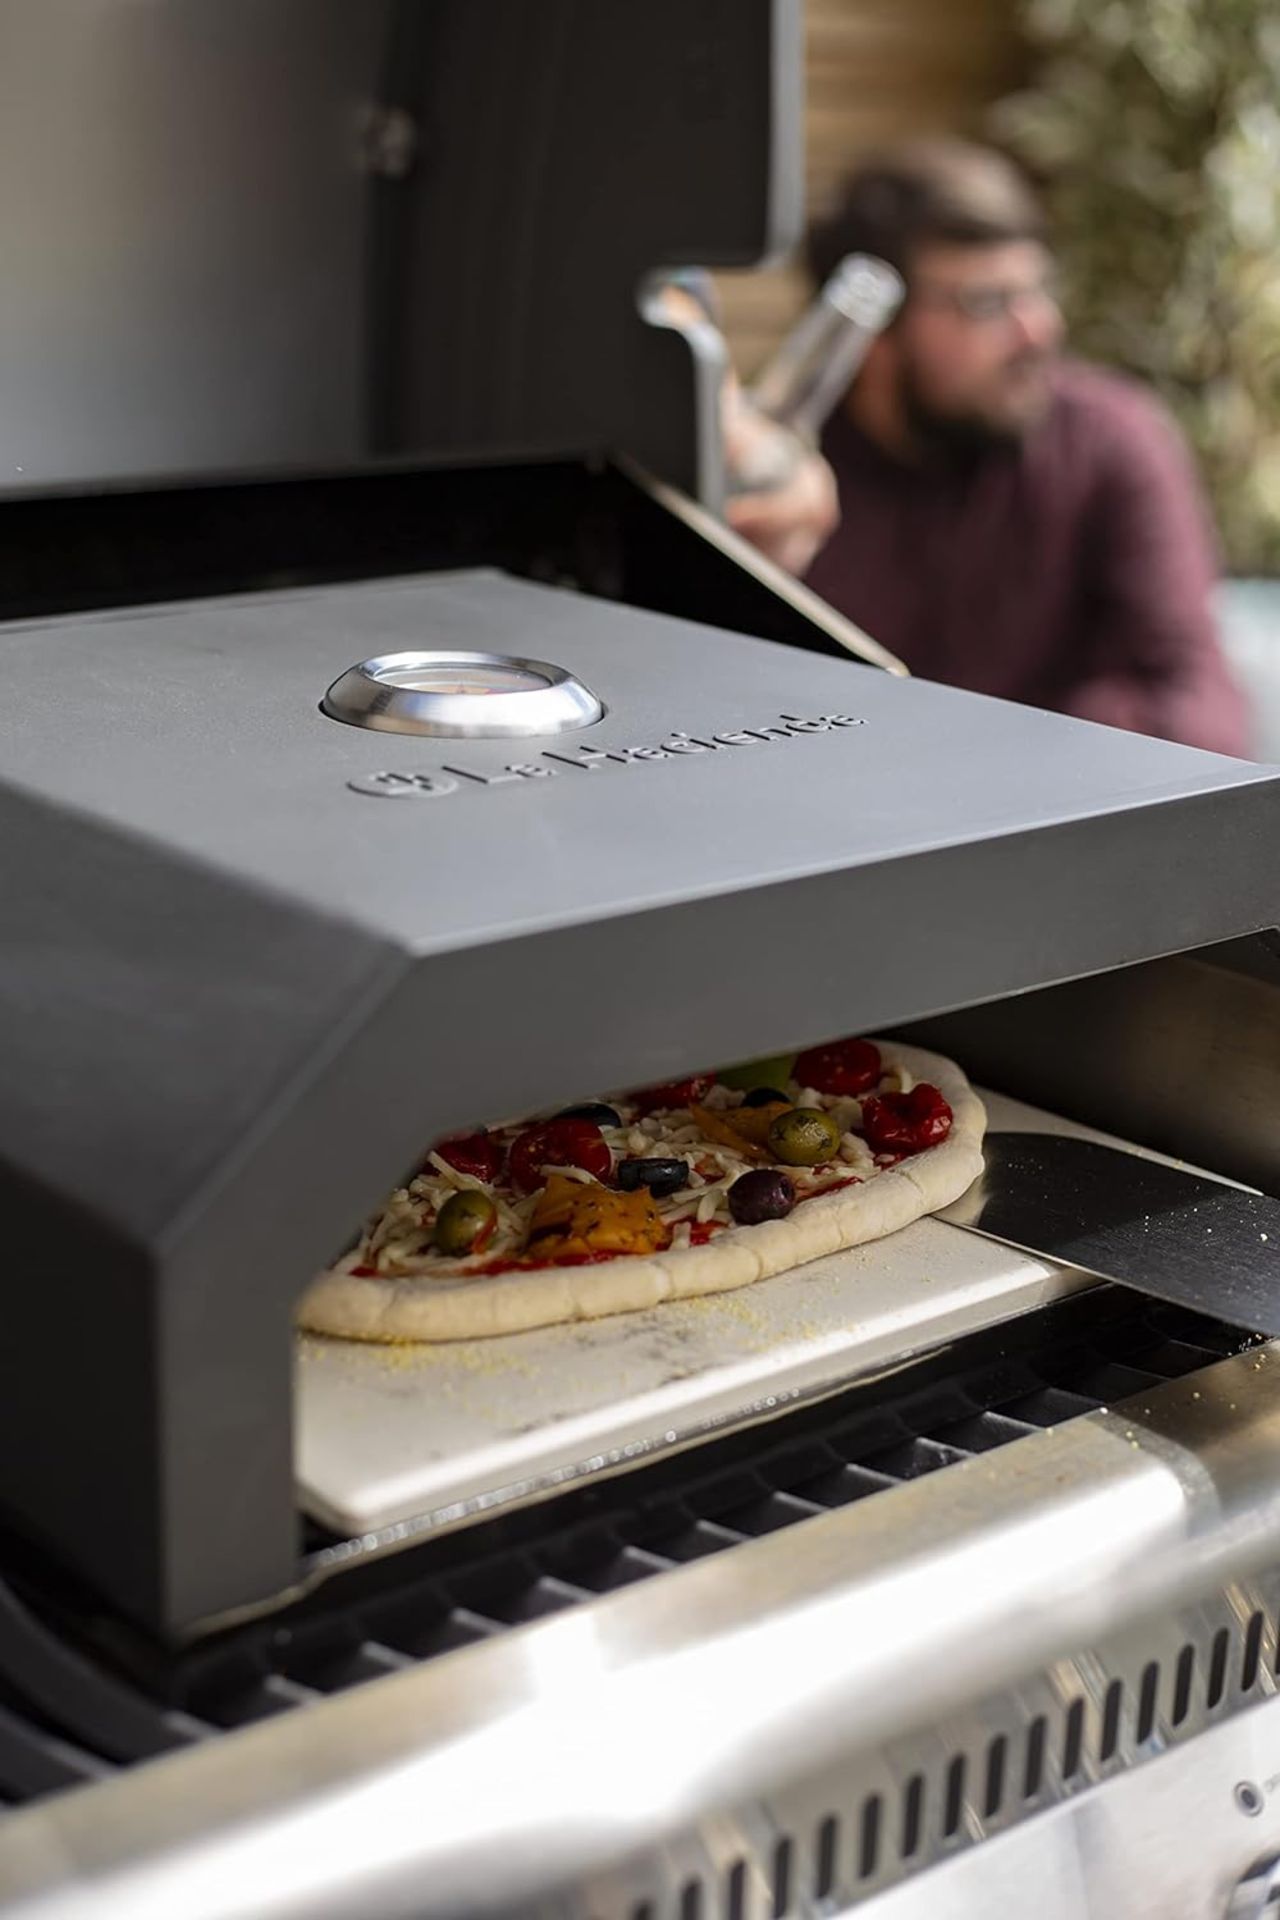 BRAND NEW LA HACIENDA Pizza Oven for Barbecues. RRP £99.99 EACH. The revolutionary BBQ Pizza Oven is - Image 3 of 3